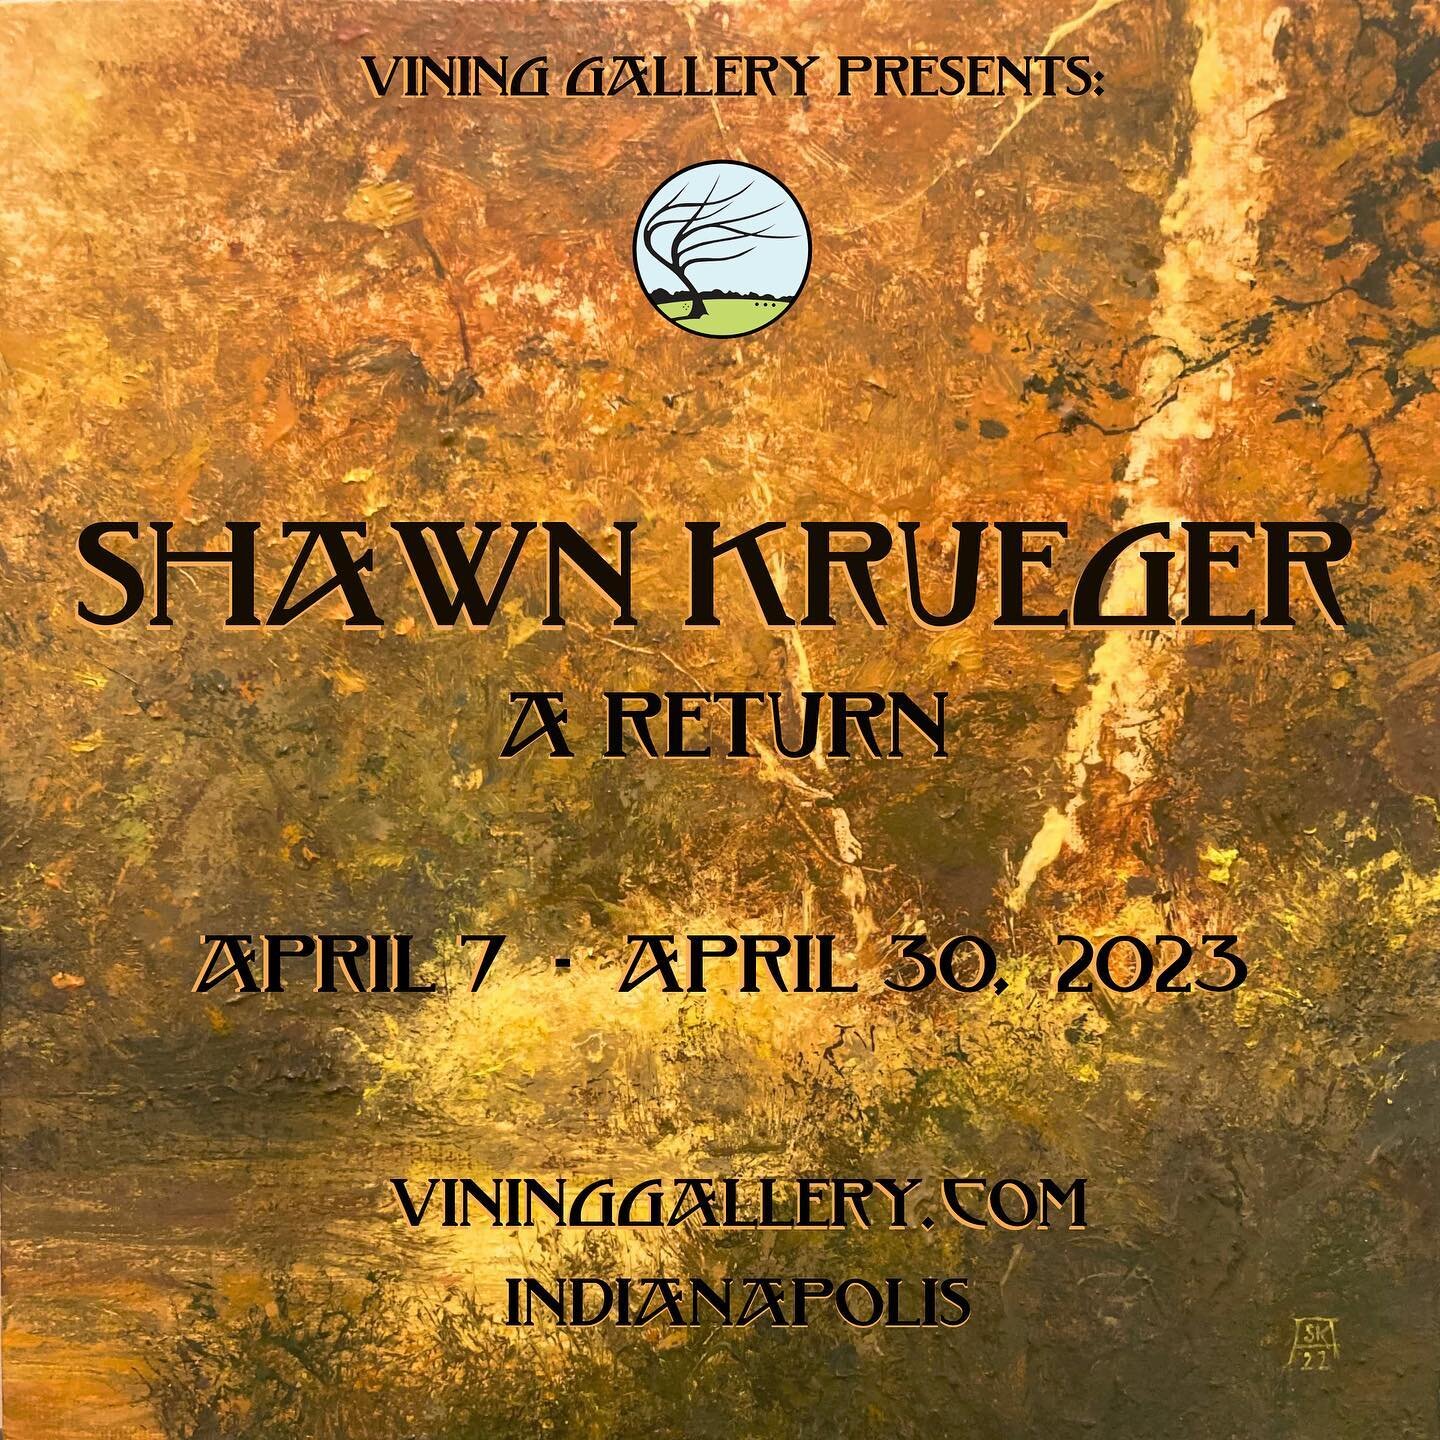 @shawn_krueger&rsquo;s new show opens 3 weeks from today!! Shawn will be exhibiting 50+ works in the gallery and I cannot wait to see the space full of his beautiful work. Shawn is also teaching a workshop in coordination with the show, there are sti